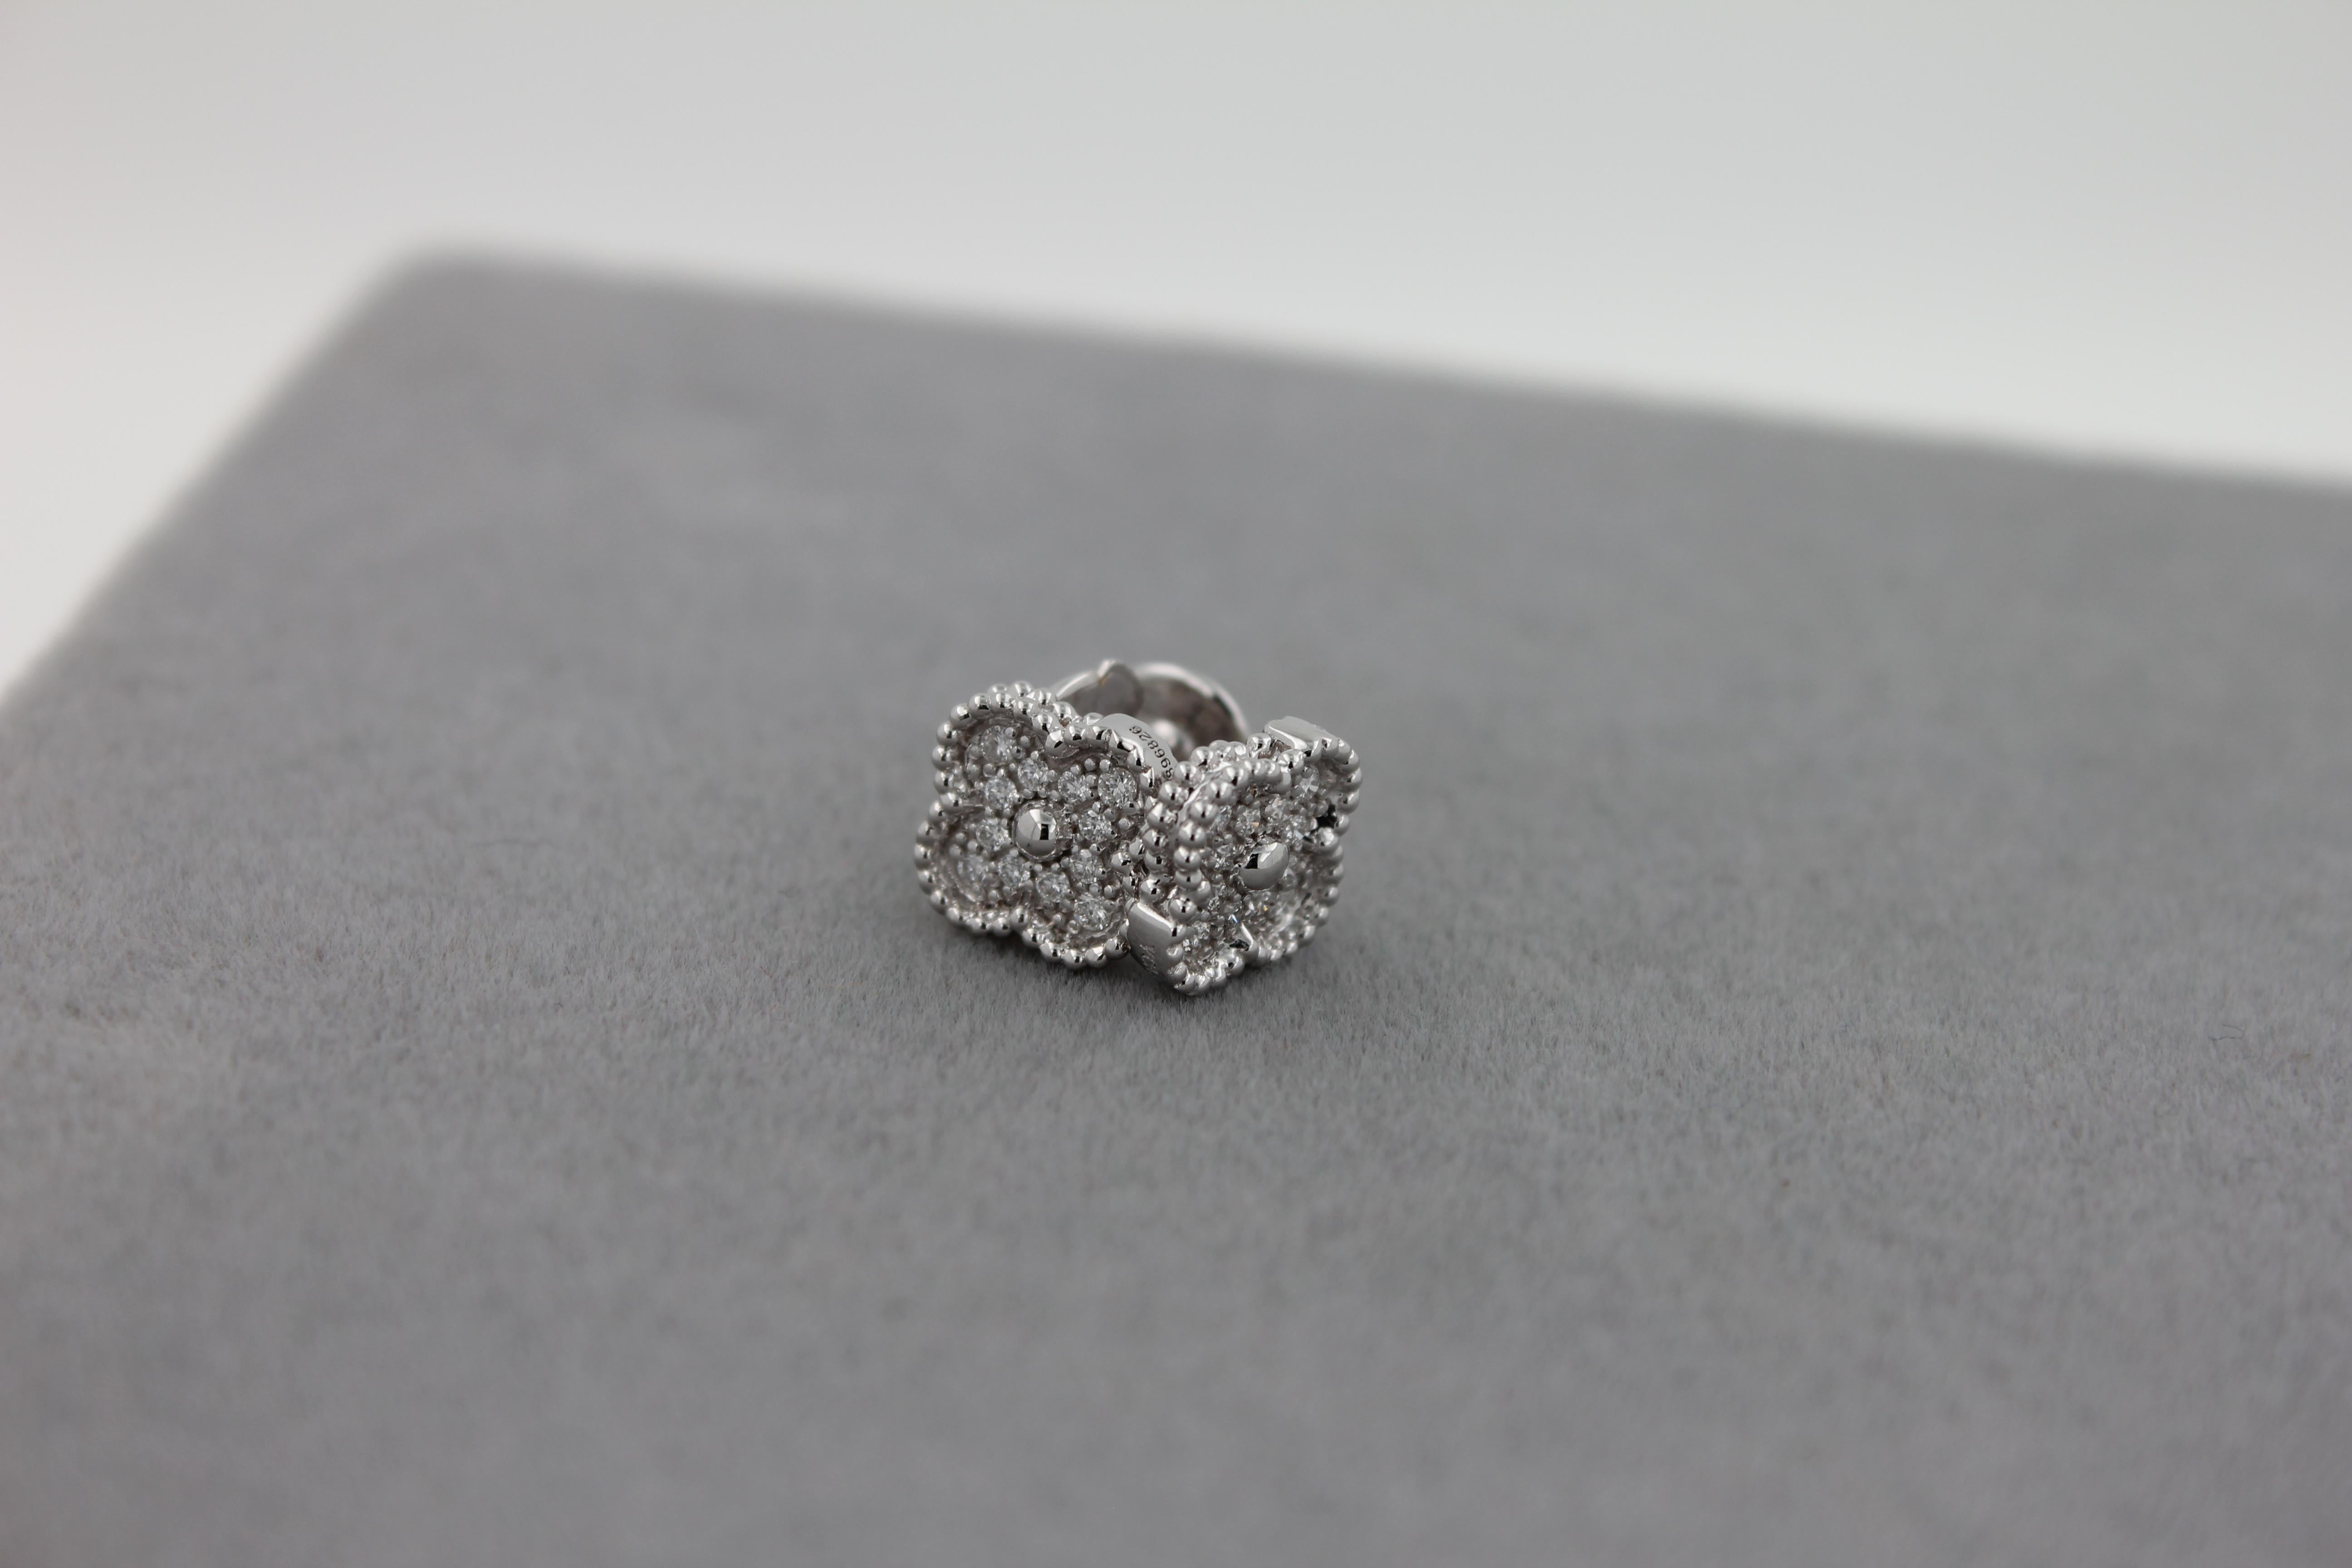 18K White Gold AU 750 
Diamond Pave Motifs - Around 0.16 Carat Weight EF/VS Quality Grades / 24 Stones Total
The brilliance and sparkle of the diamonds is of the highest level. Please review all photos and video to see how gorgeous it looks.